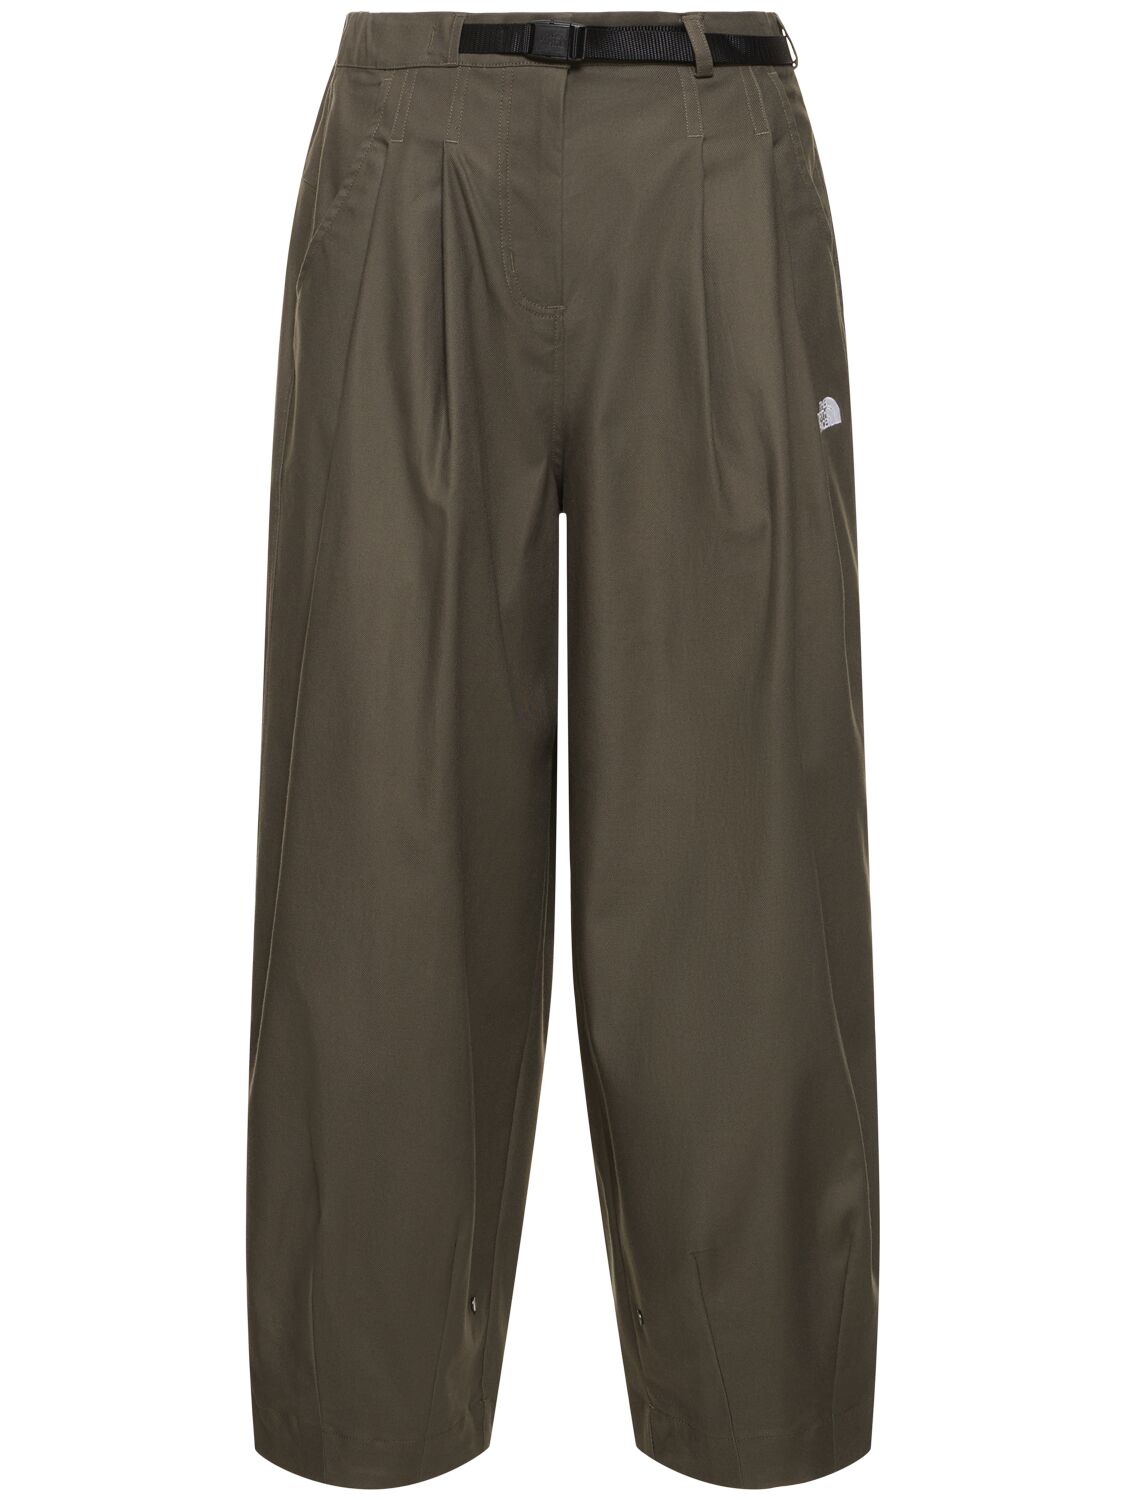 THE NORTH FACE PLEATED CASUAL trousers